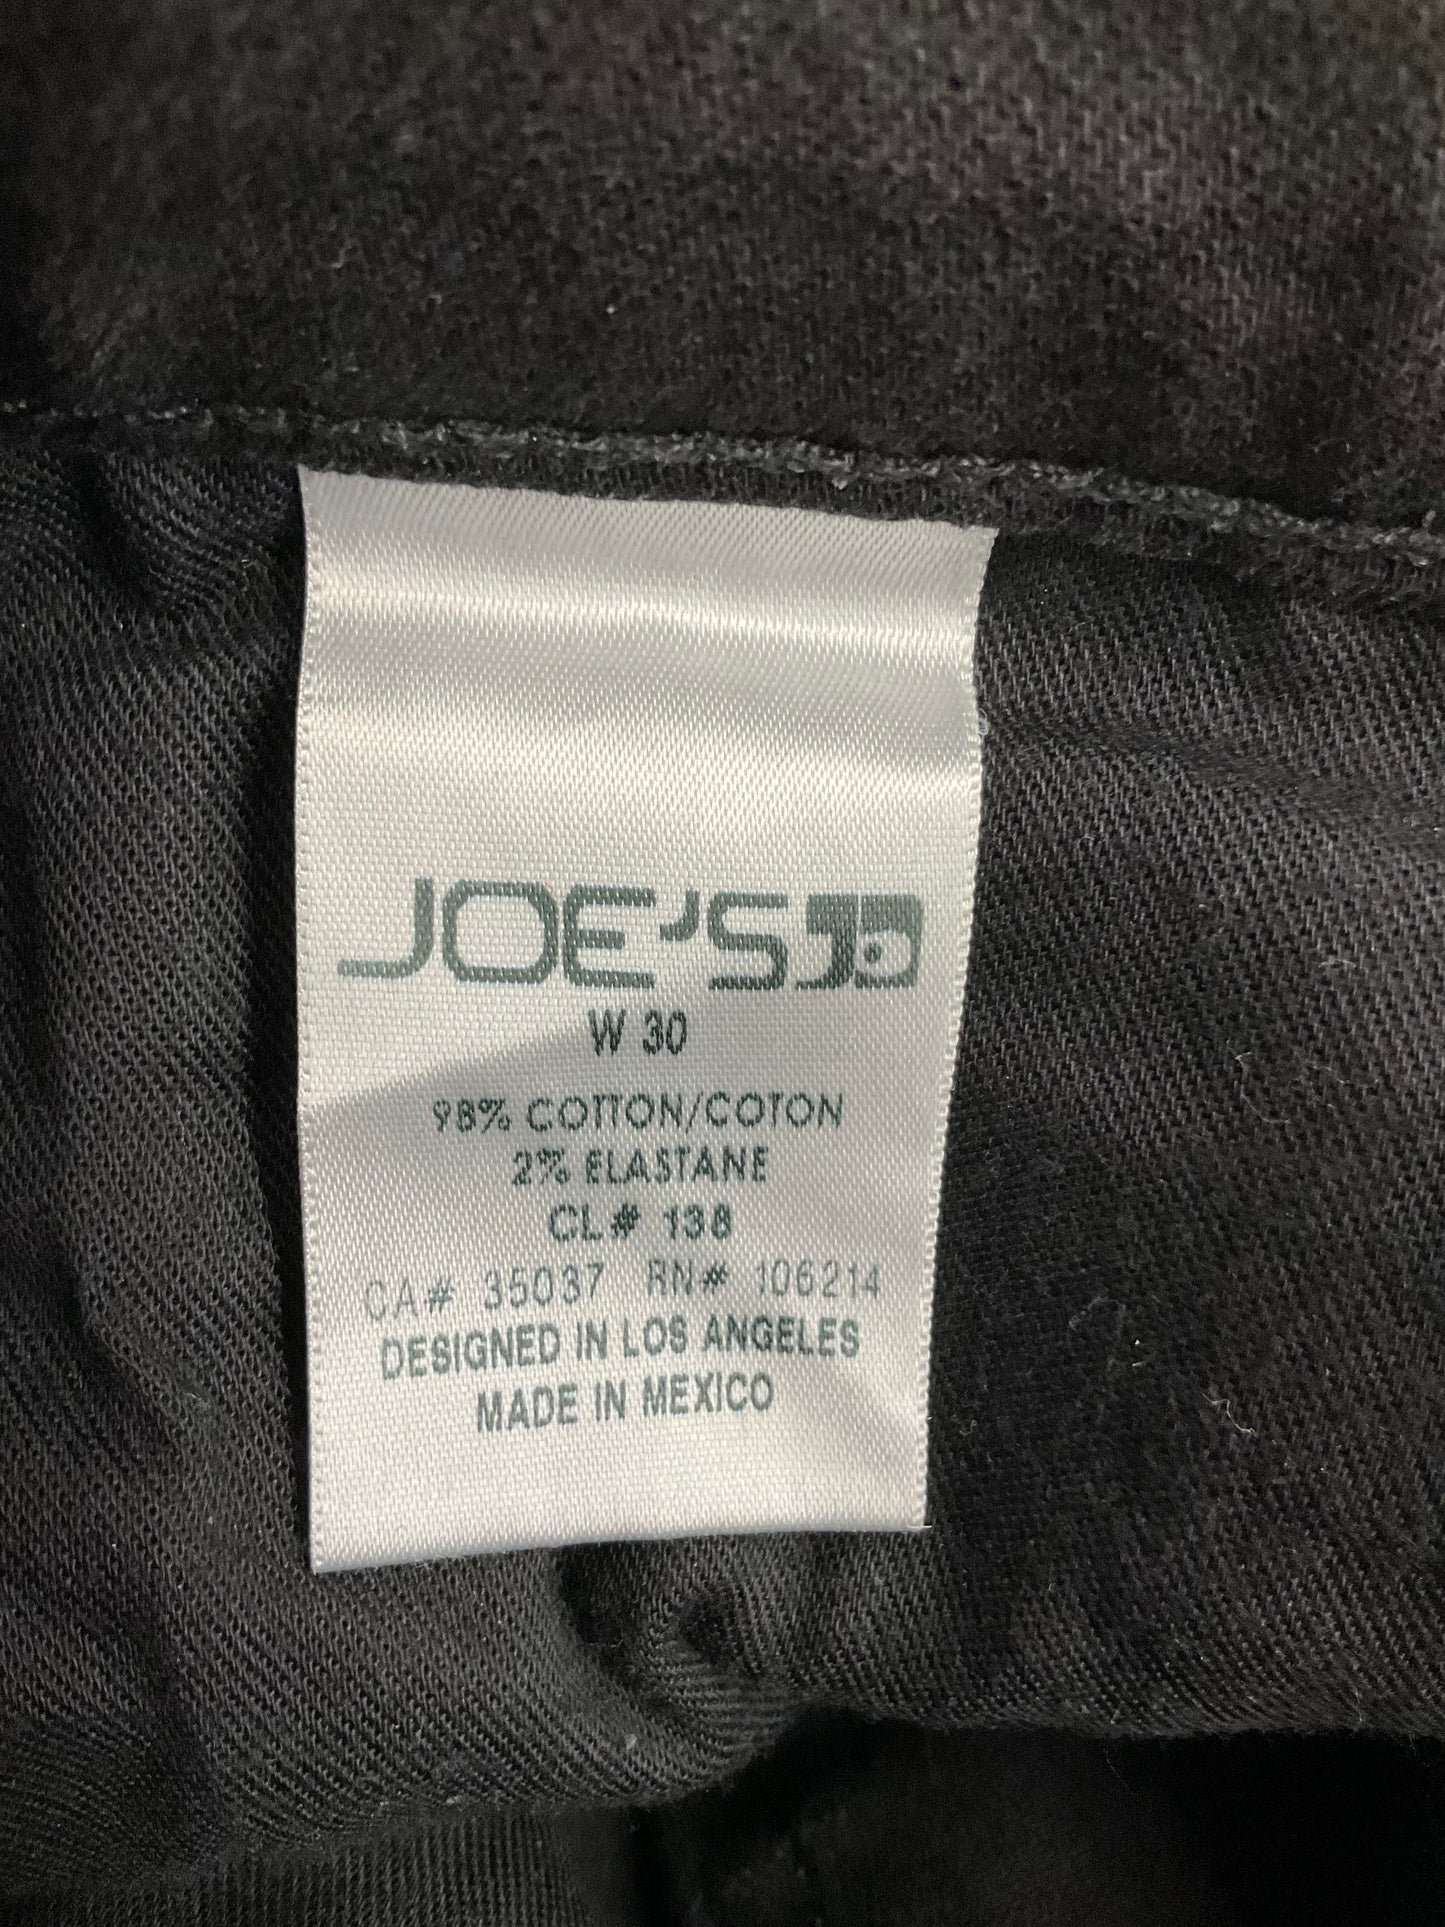 Pants Cargo & Utility By Joes Jeans  Size: 10